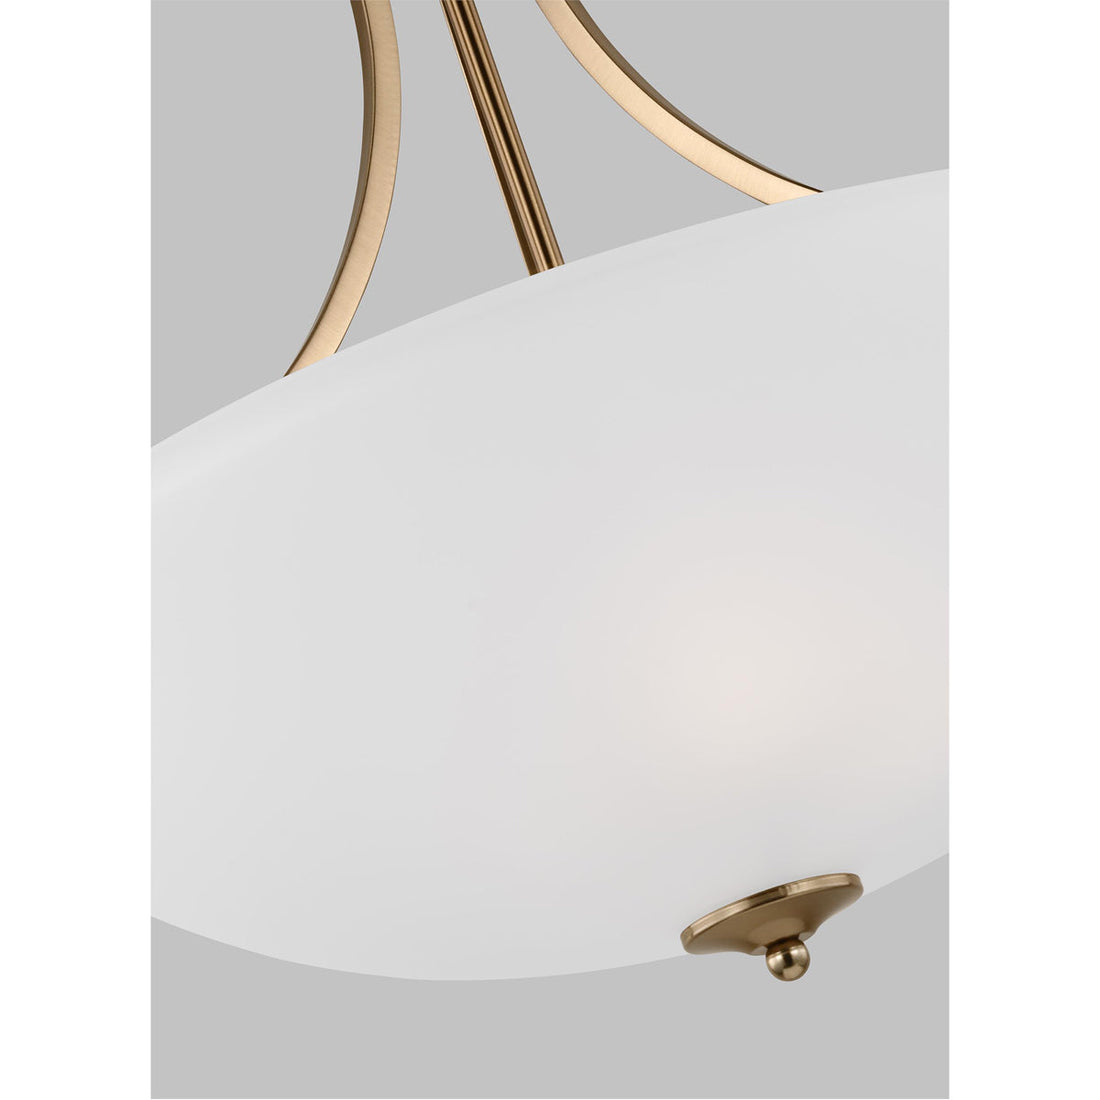 Sea Gull Lighting Geary 4-Light Pendant without Bulb